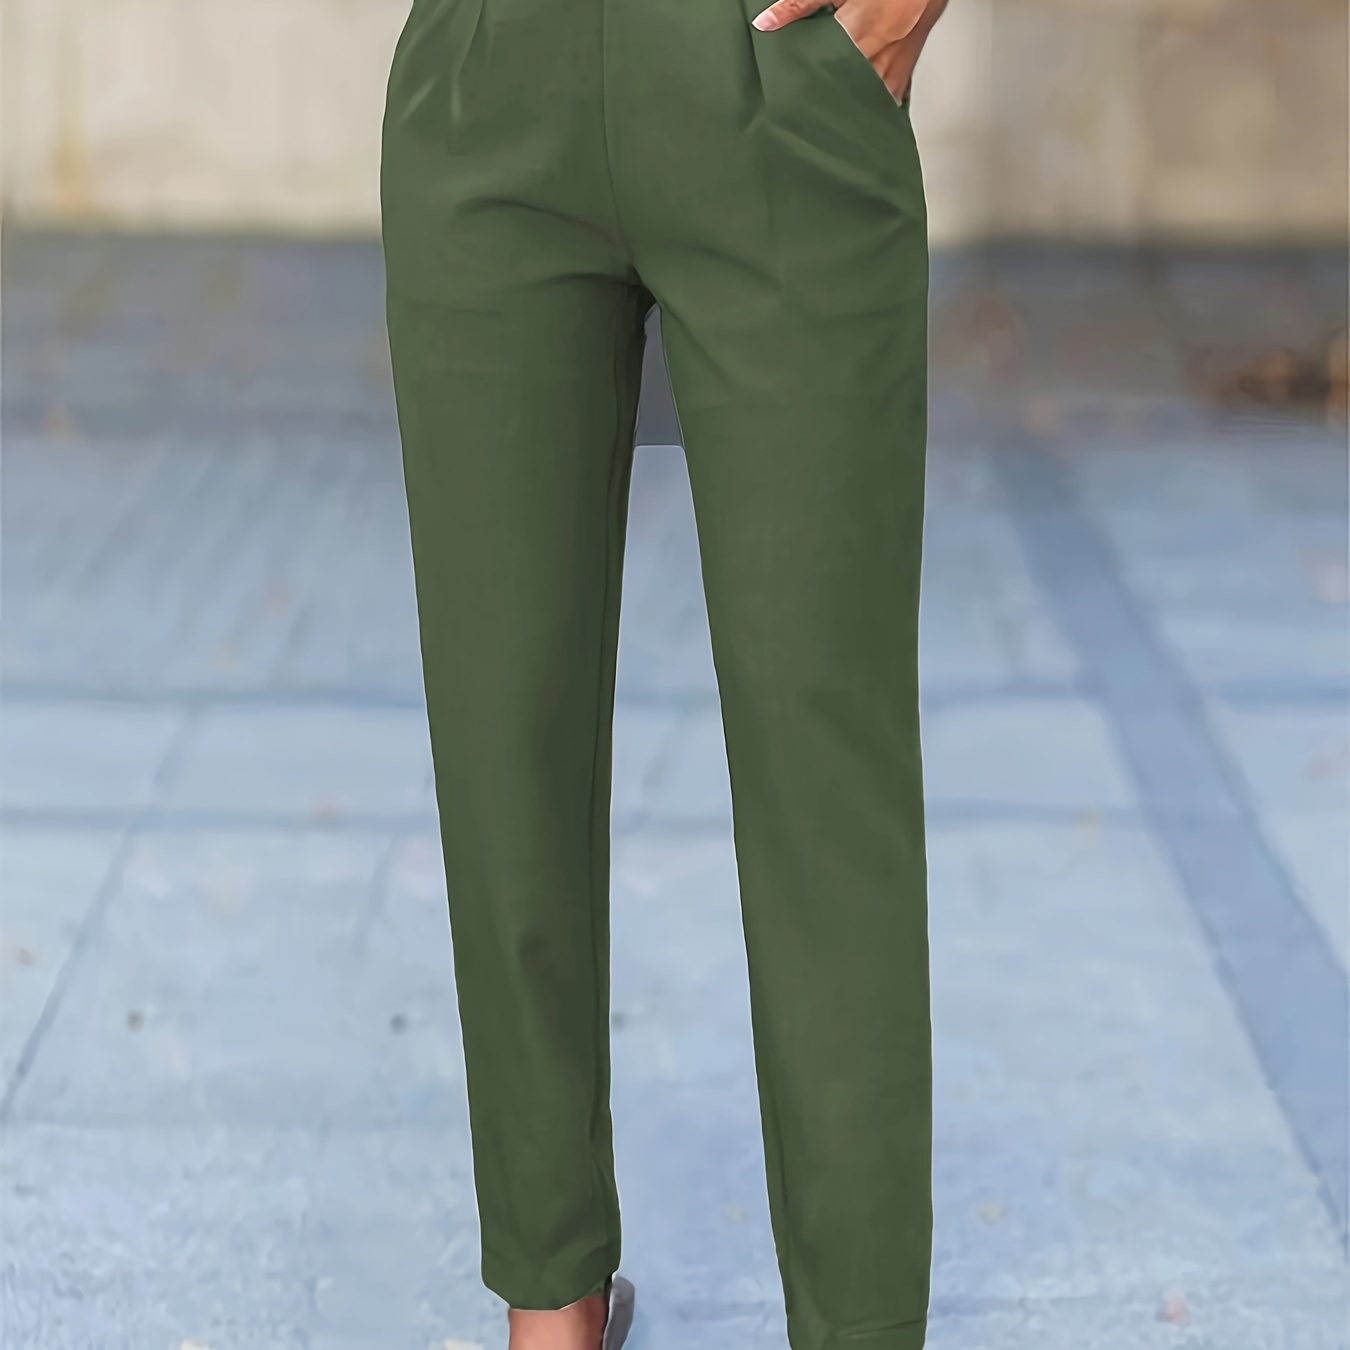 

Slant Pockets Tapered Pants, Casual High Waist Carrot Pants For Spring & Summer, Women's Clothing